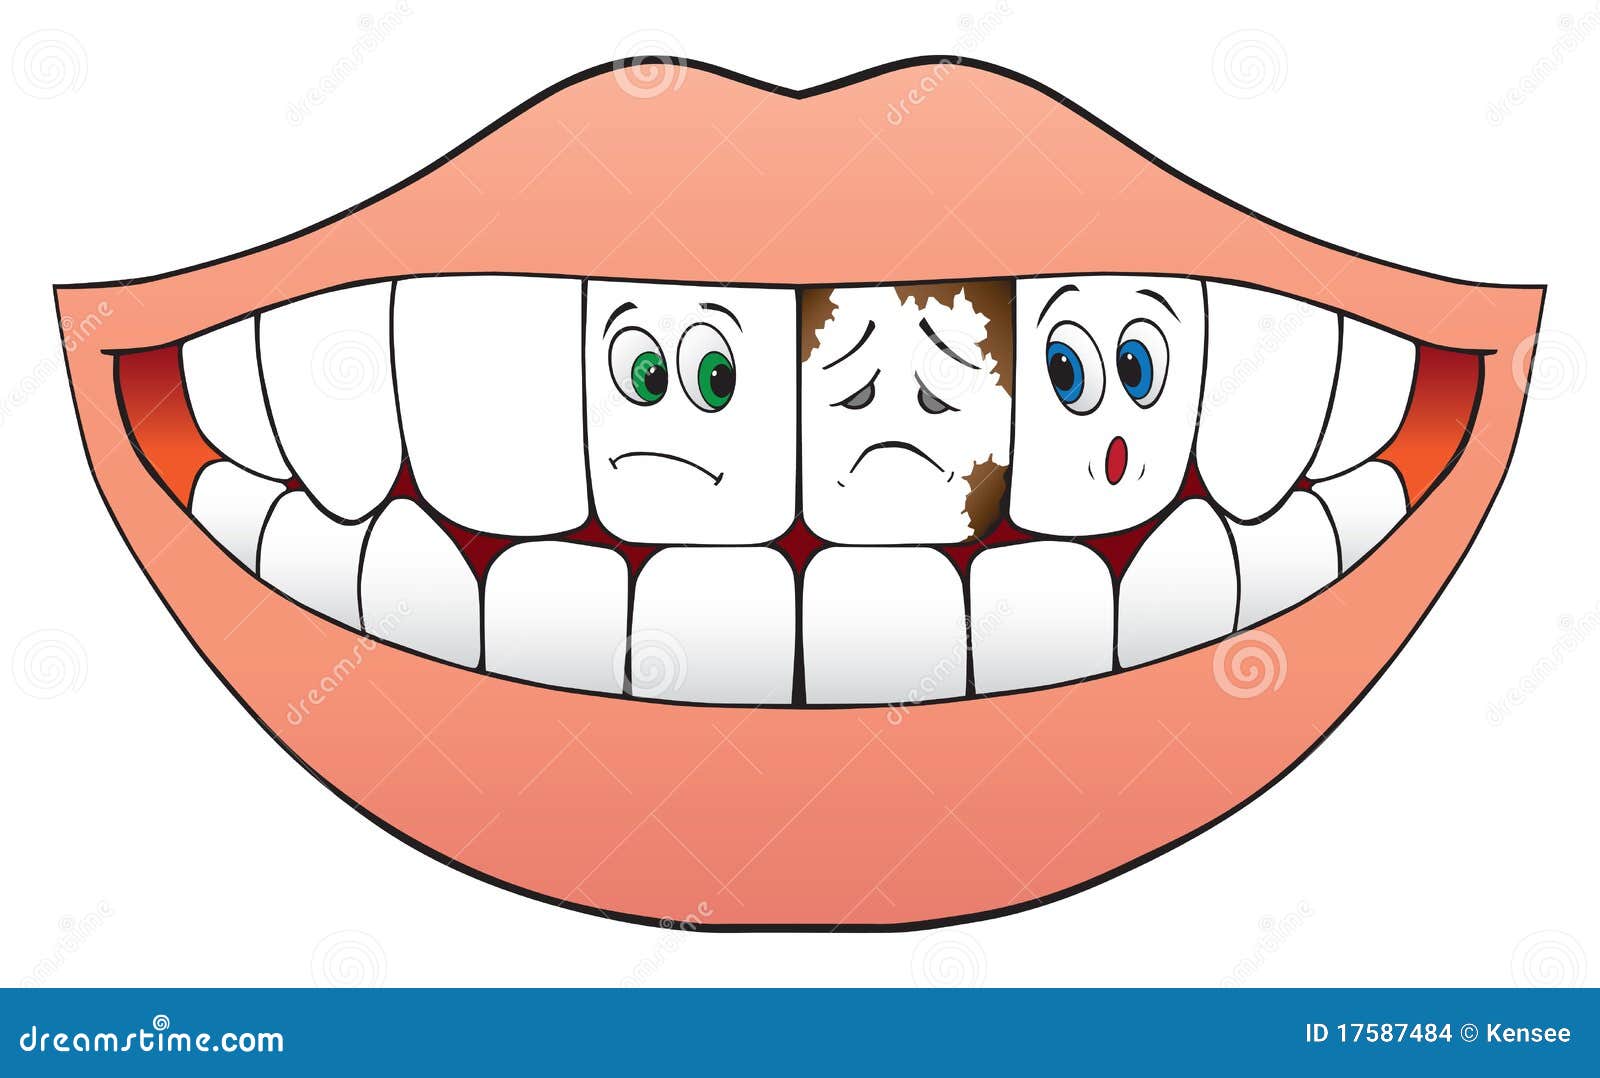 clipart of teeth and lips - photo #35